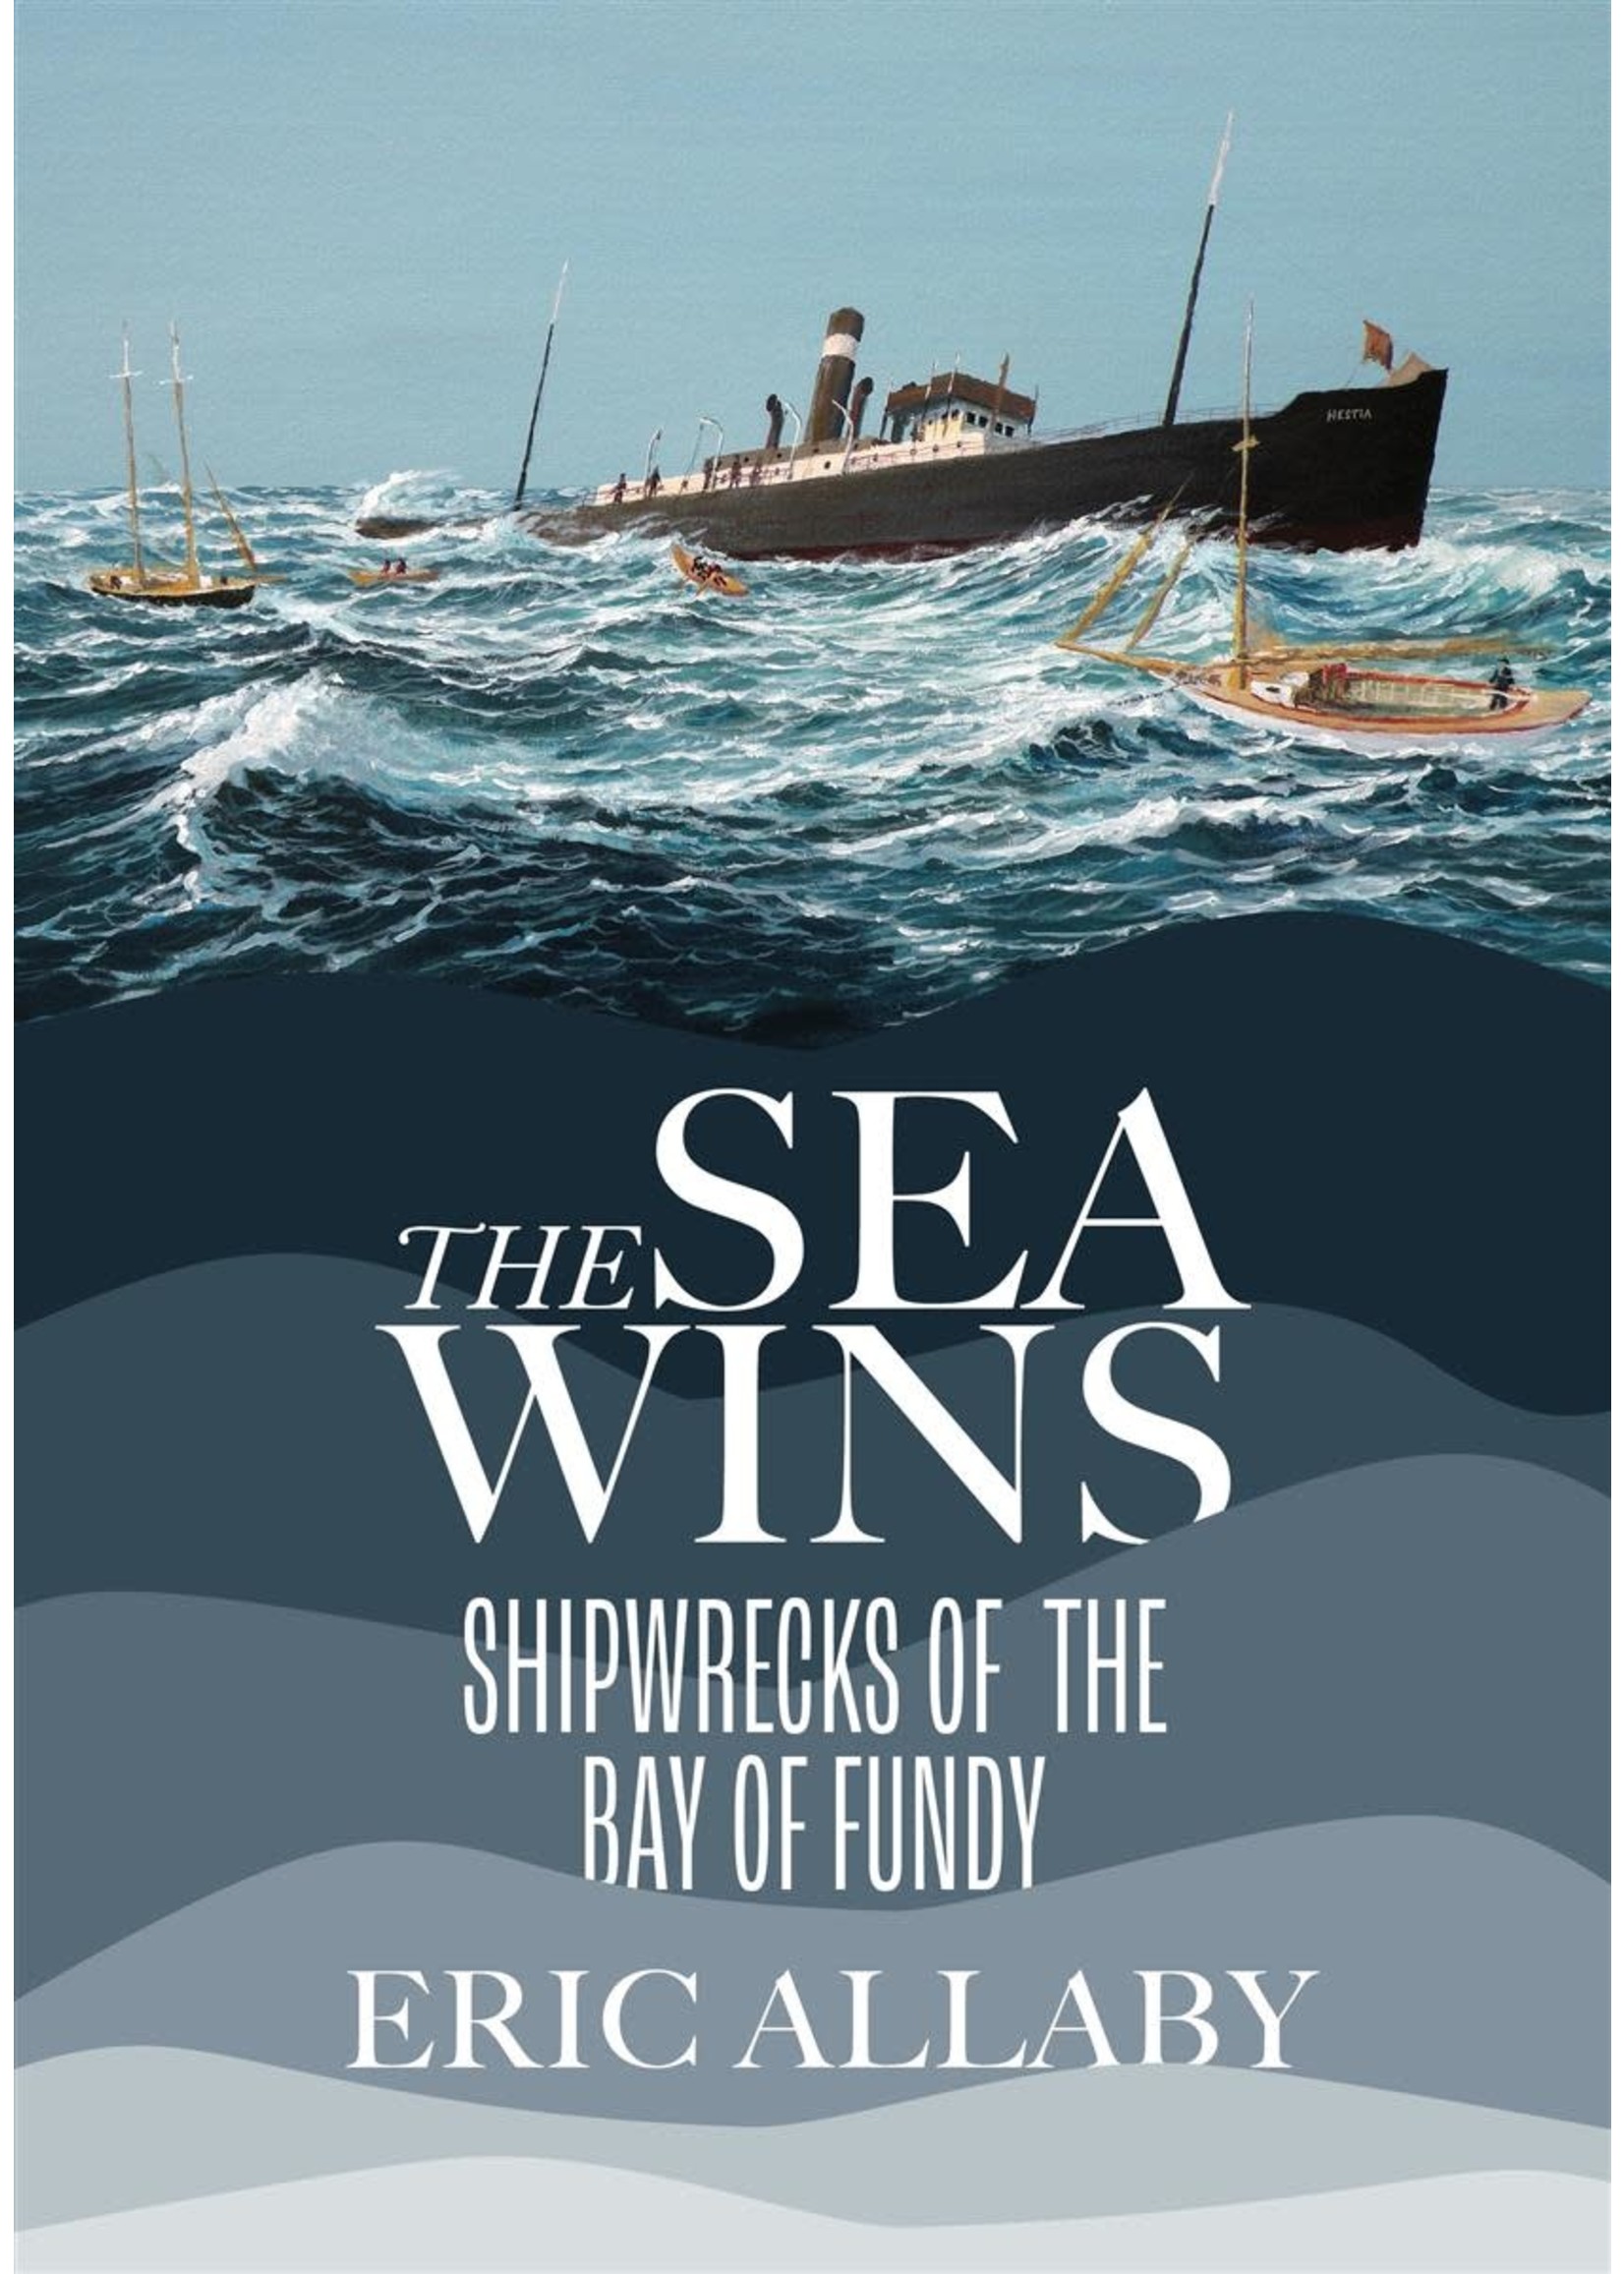 The Sea Wins by Eric Allaby